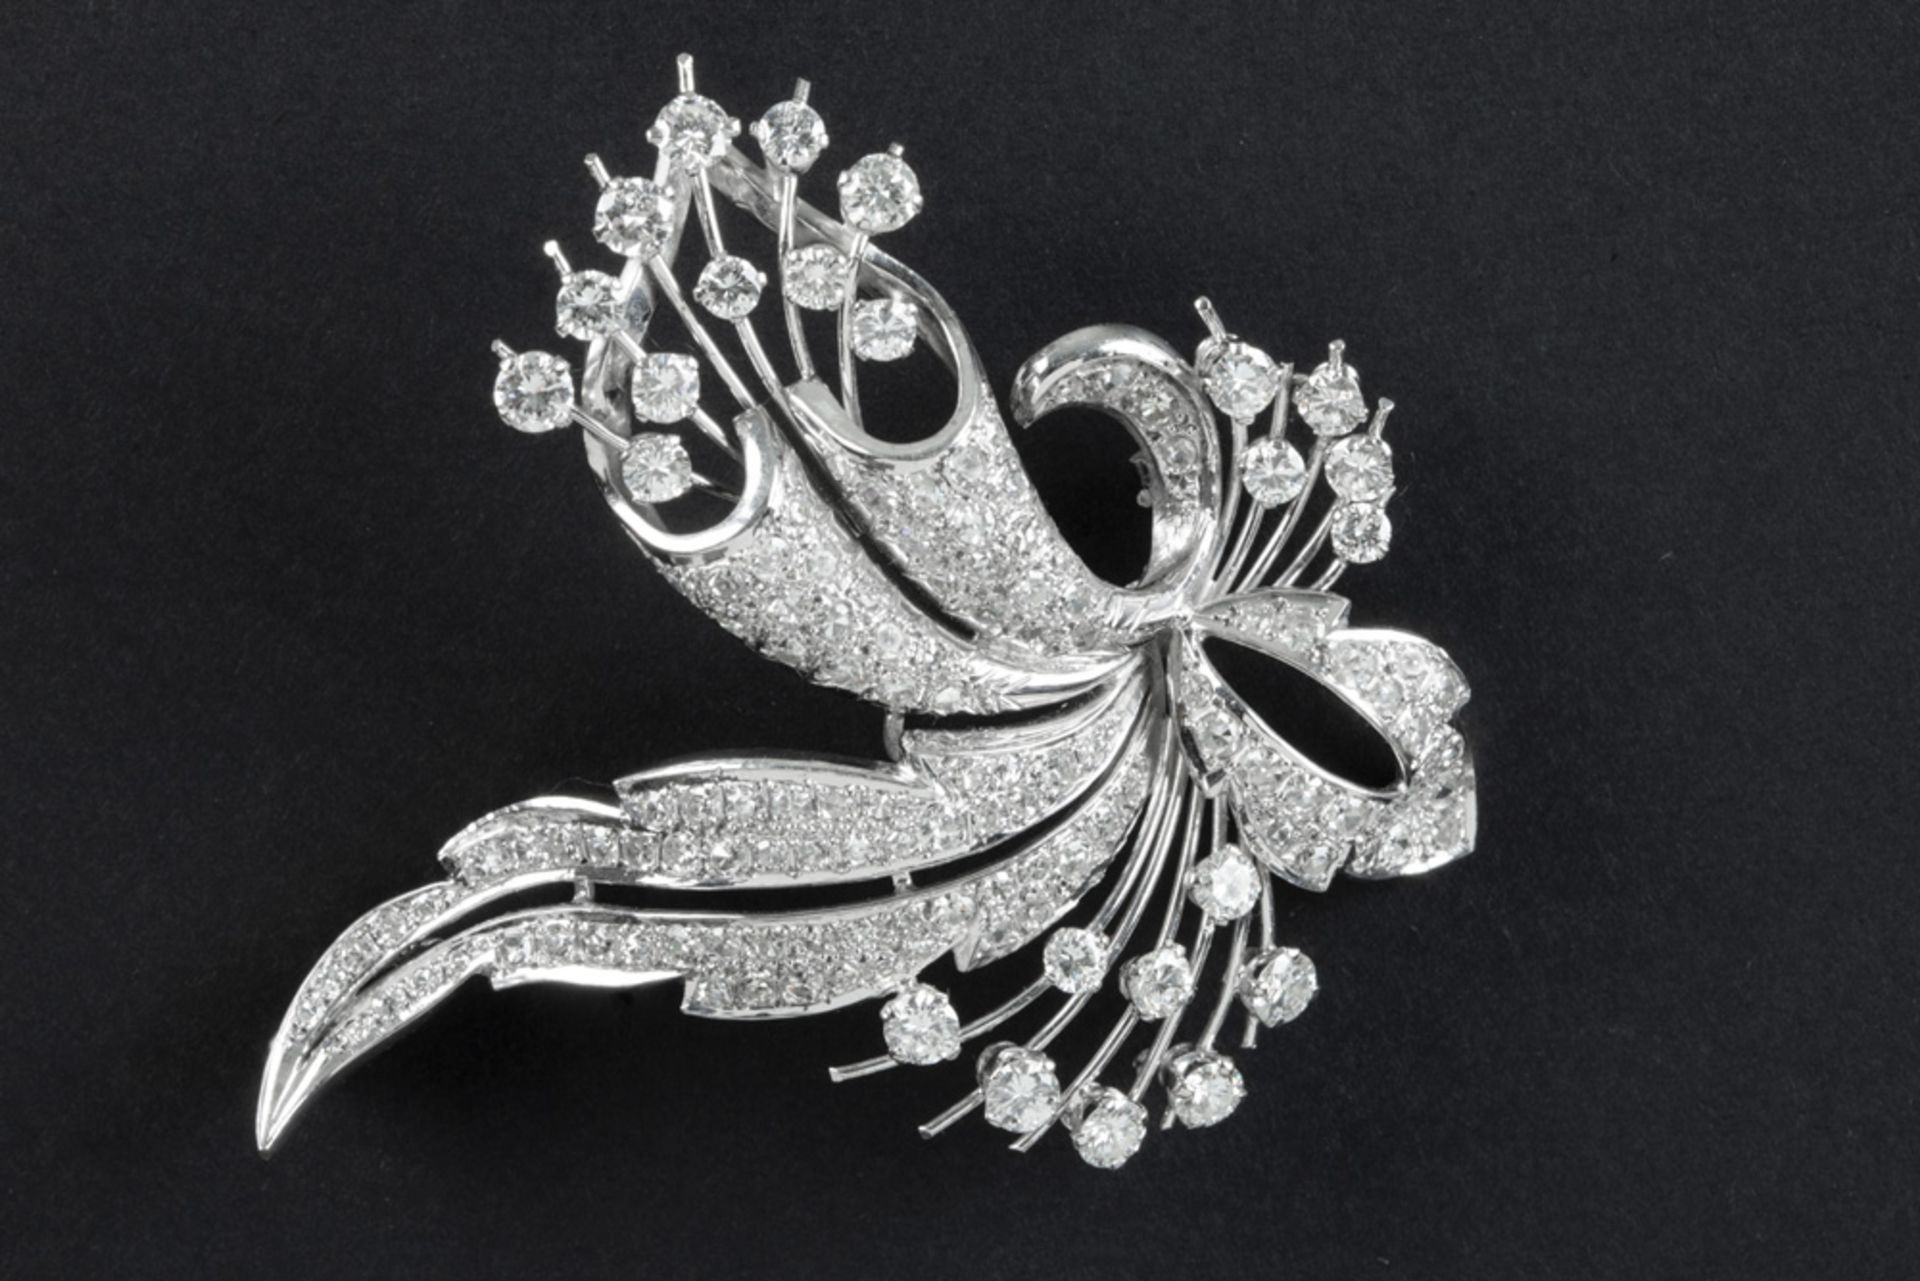 elegant sixties' vintage brooch in white gold (18 carat) with ca 5 carat of high quality brilliant